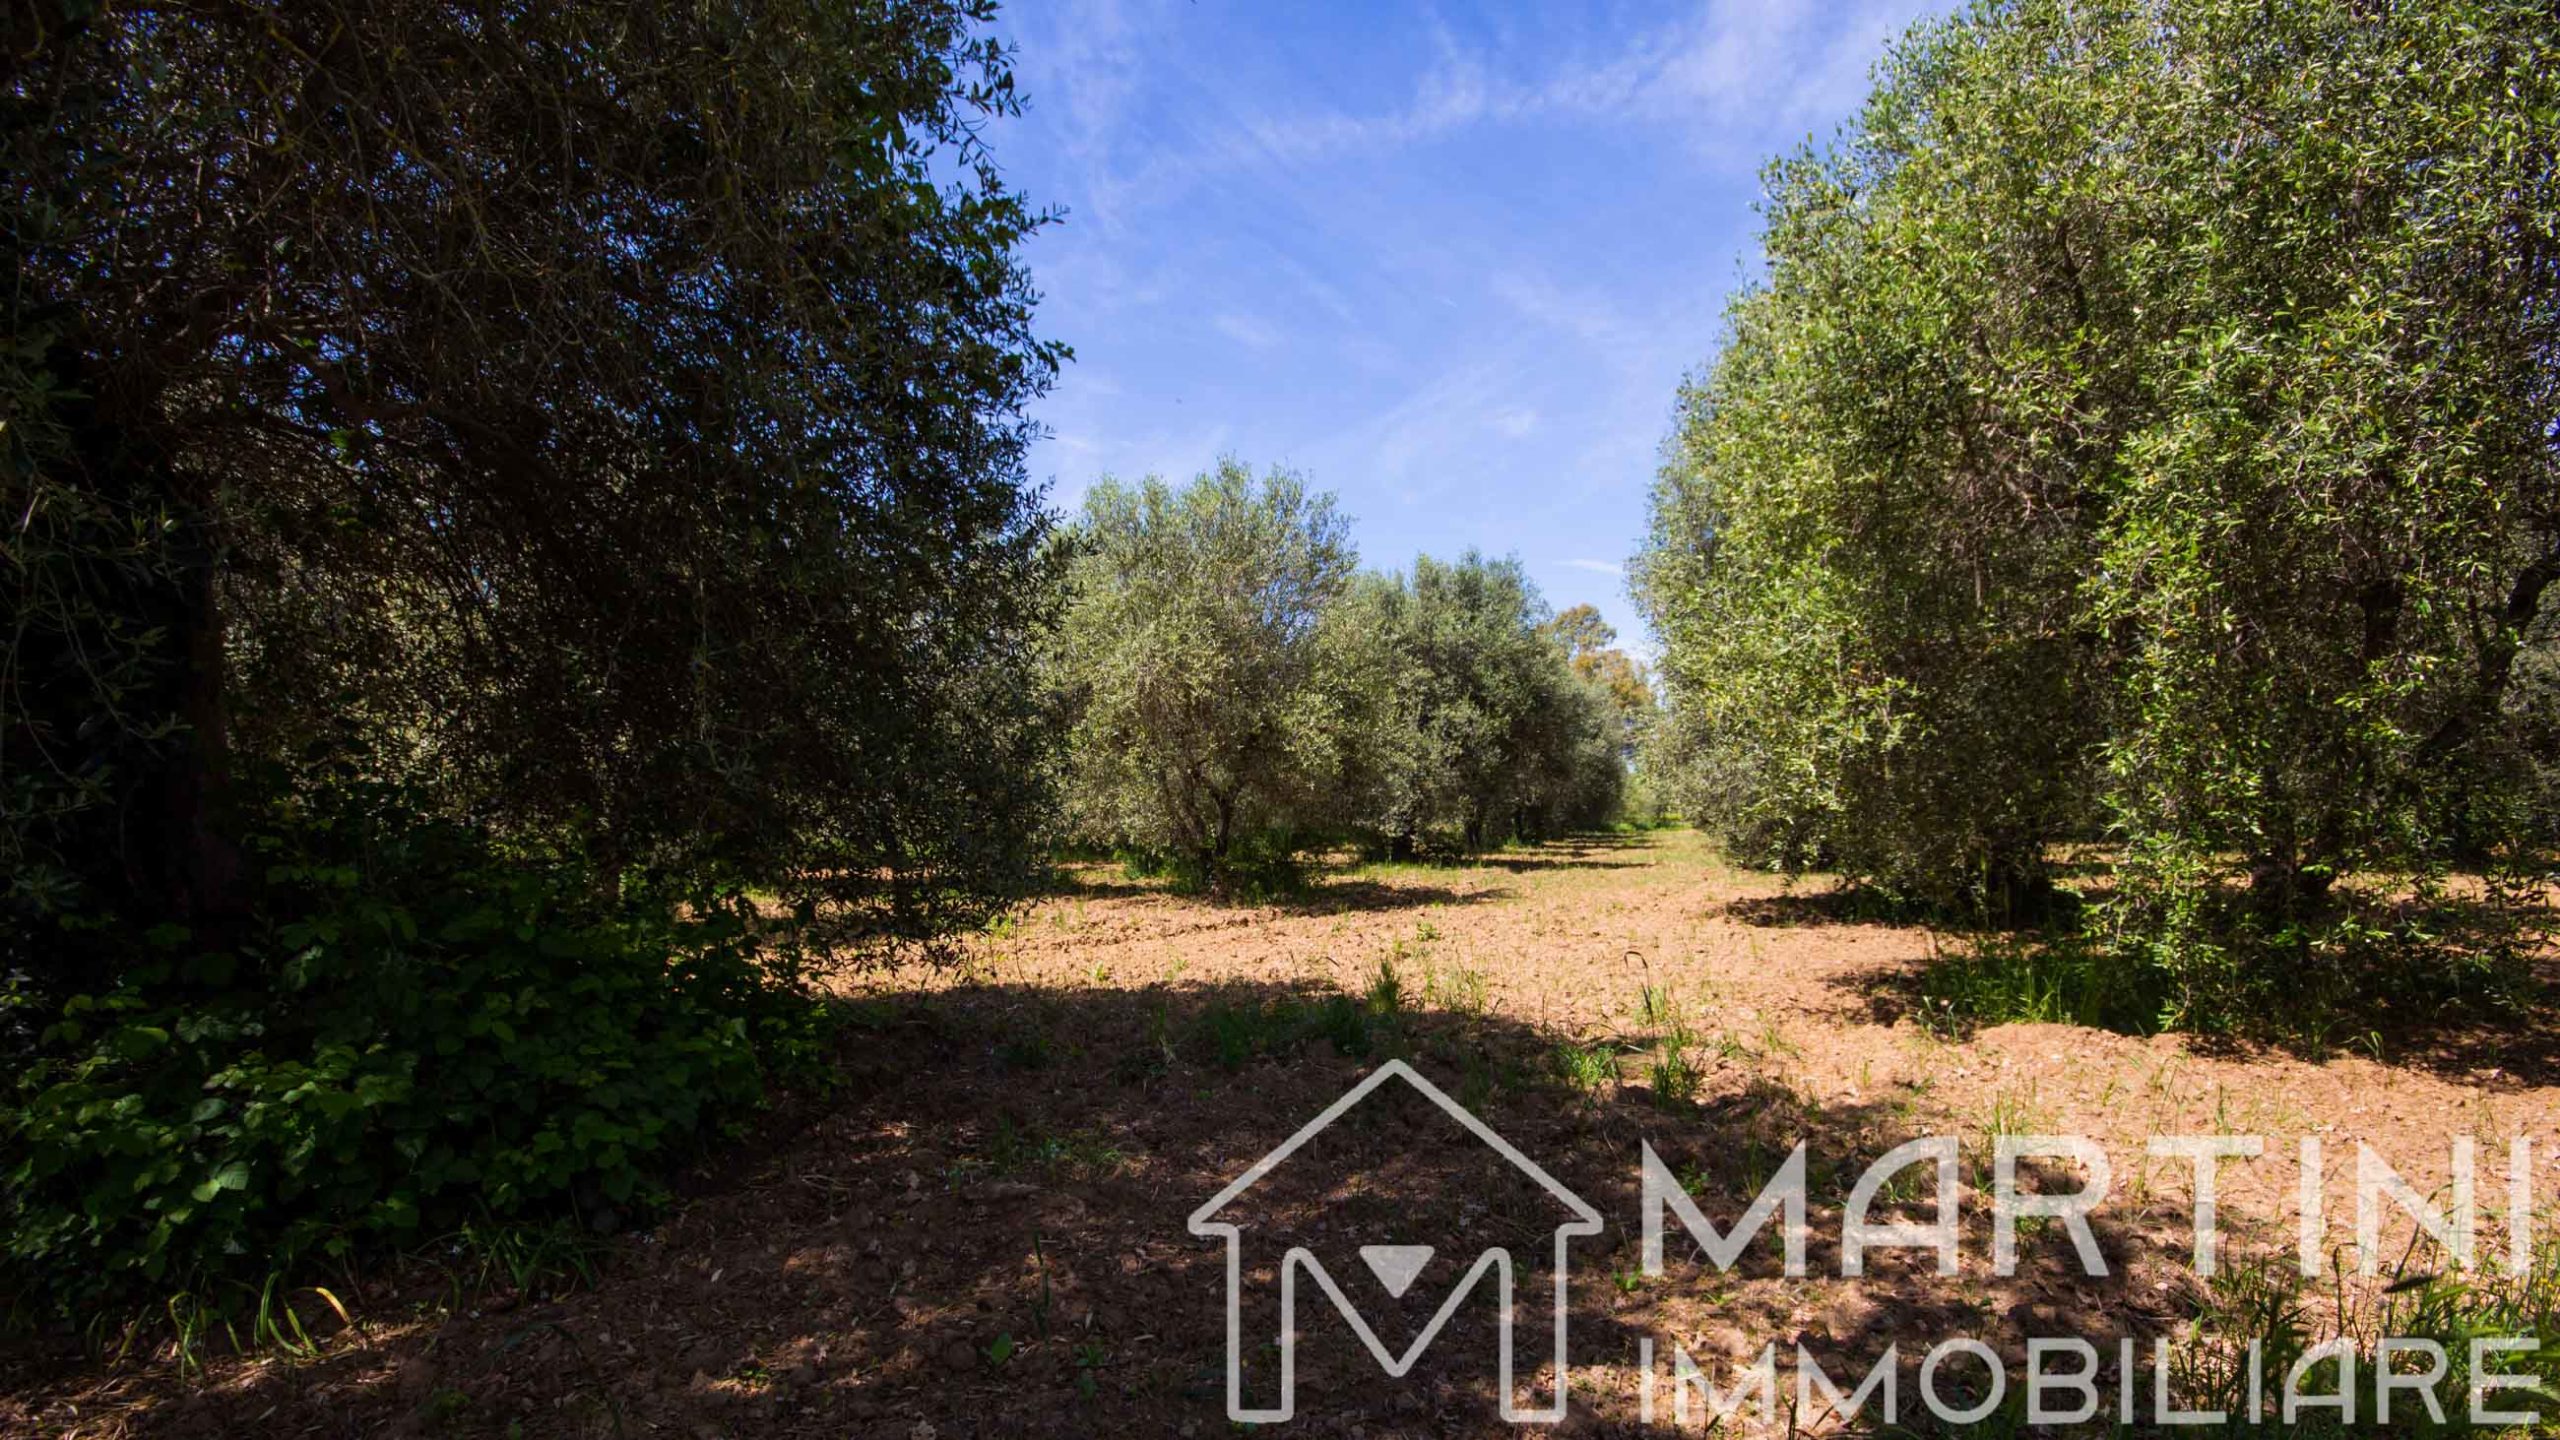 Plot of Land for Sale in Scarlino